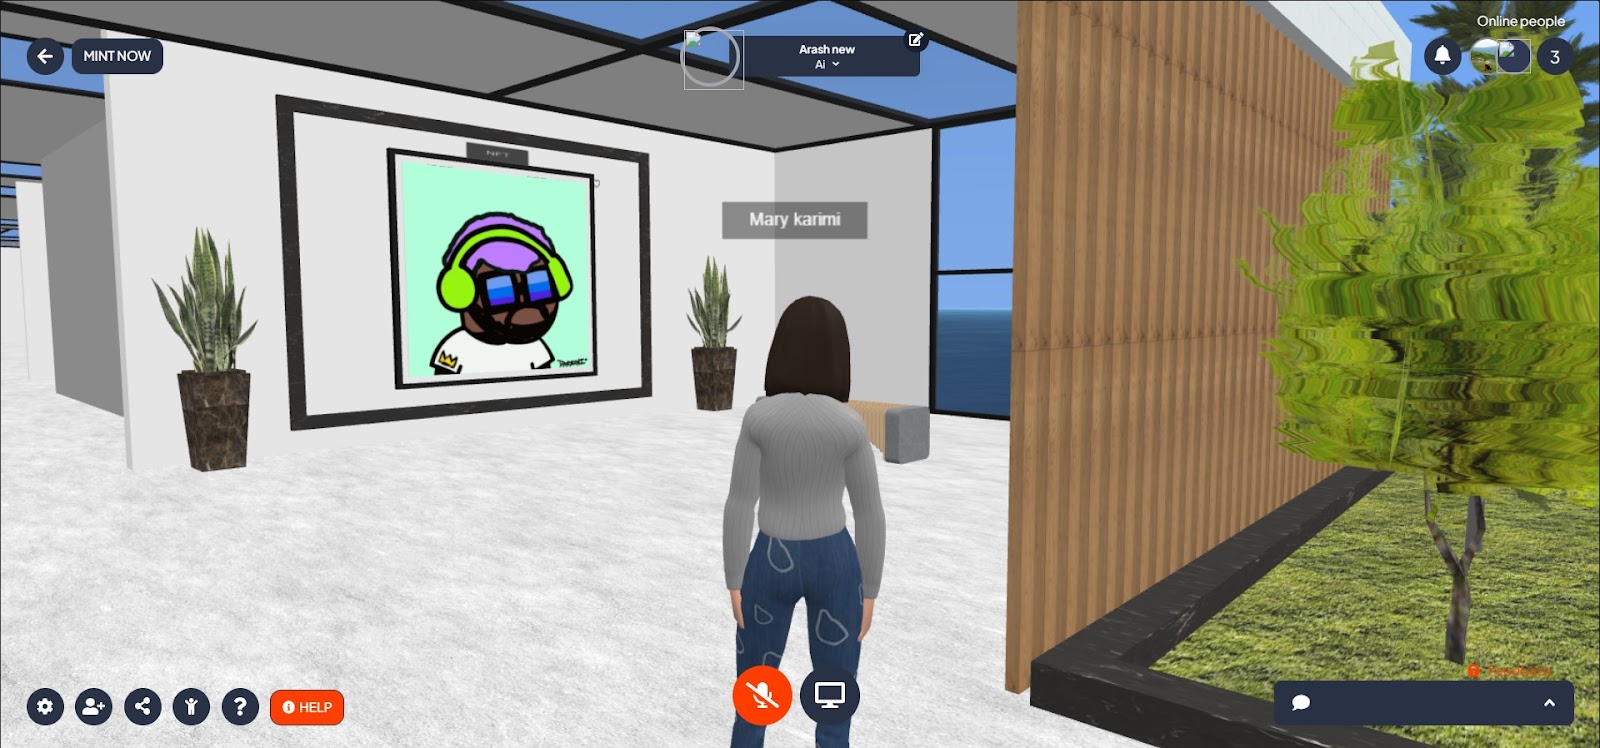 How NFT artists can grow their community in the metaverse and virtual world